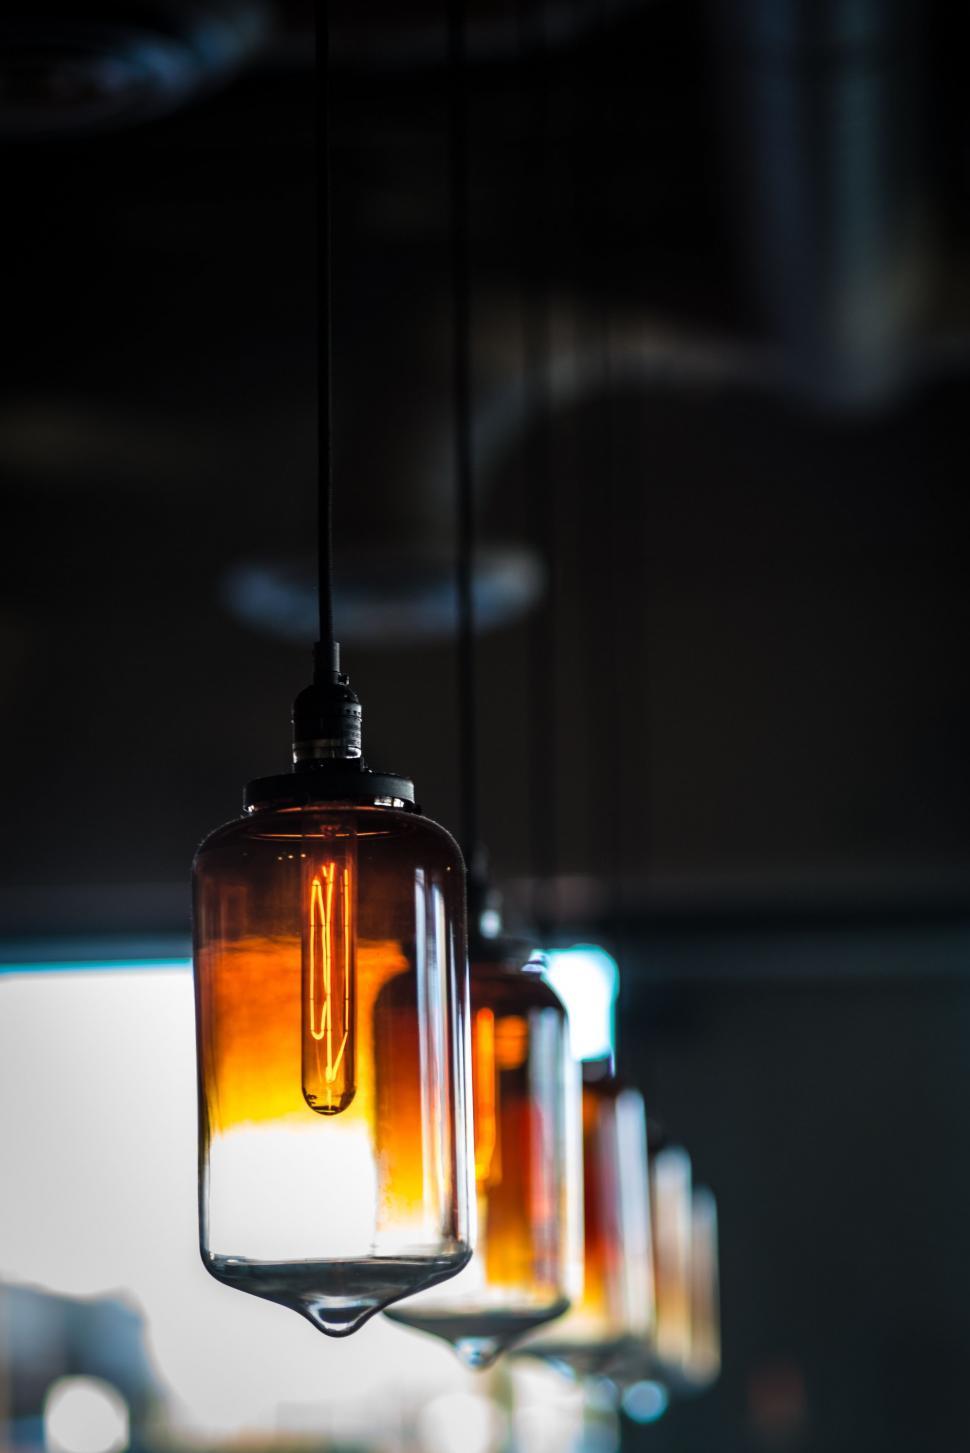 Free Image of Group of Glass Jars Hanging From Ceiling 